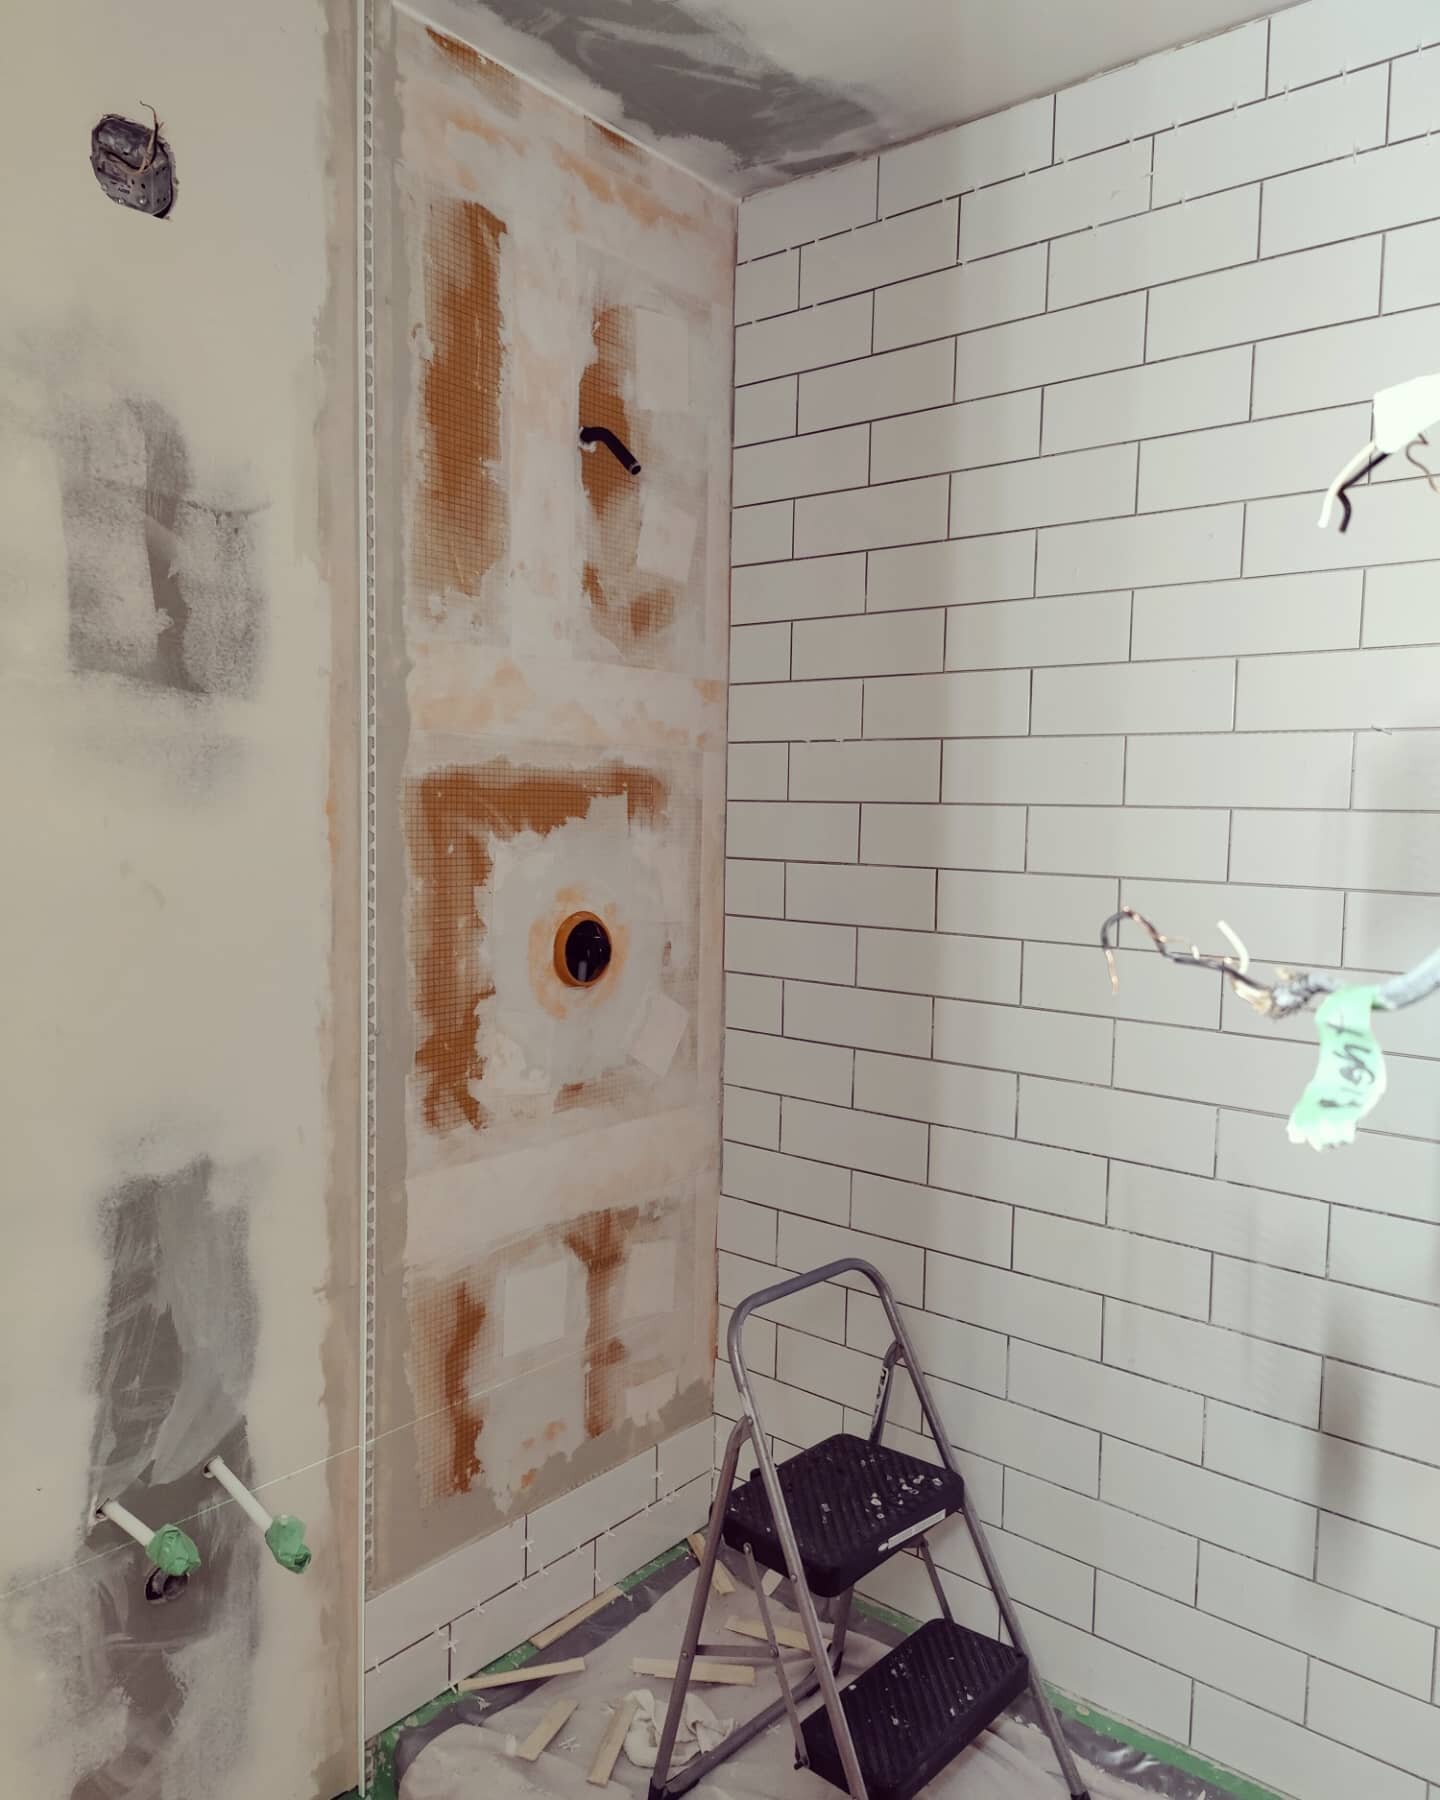 Here's another sneak peek at our progress on the bathroom renos 👀

We've never done most of these jobs before so the first one is moving slow, but we're so happy with how it's going!

Swipe to see what was here before &gt;&gt;&gt;